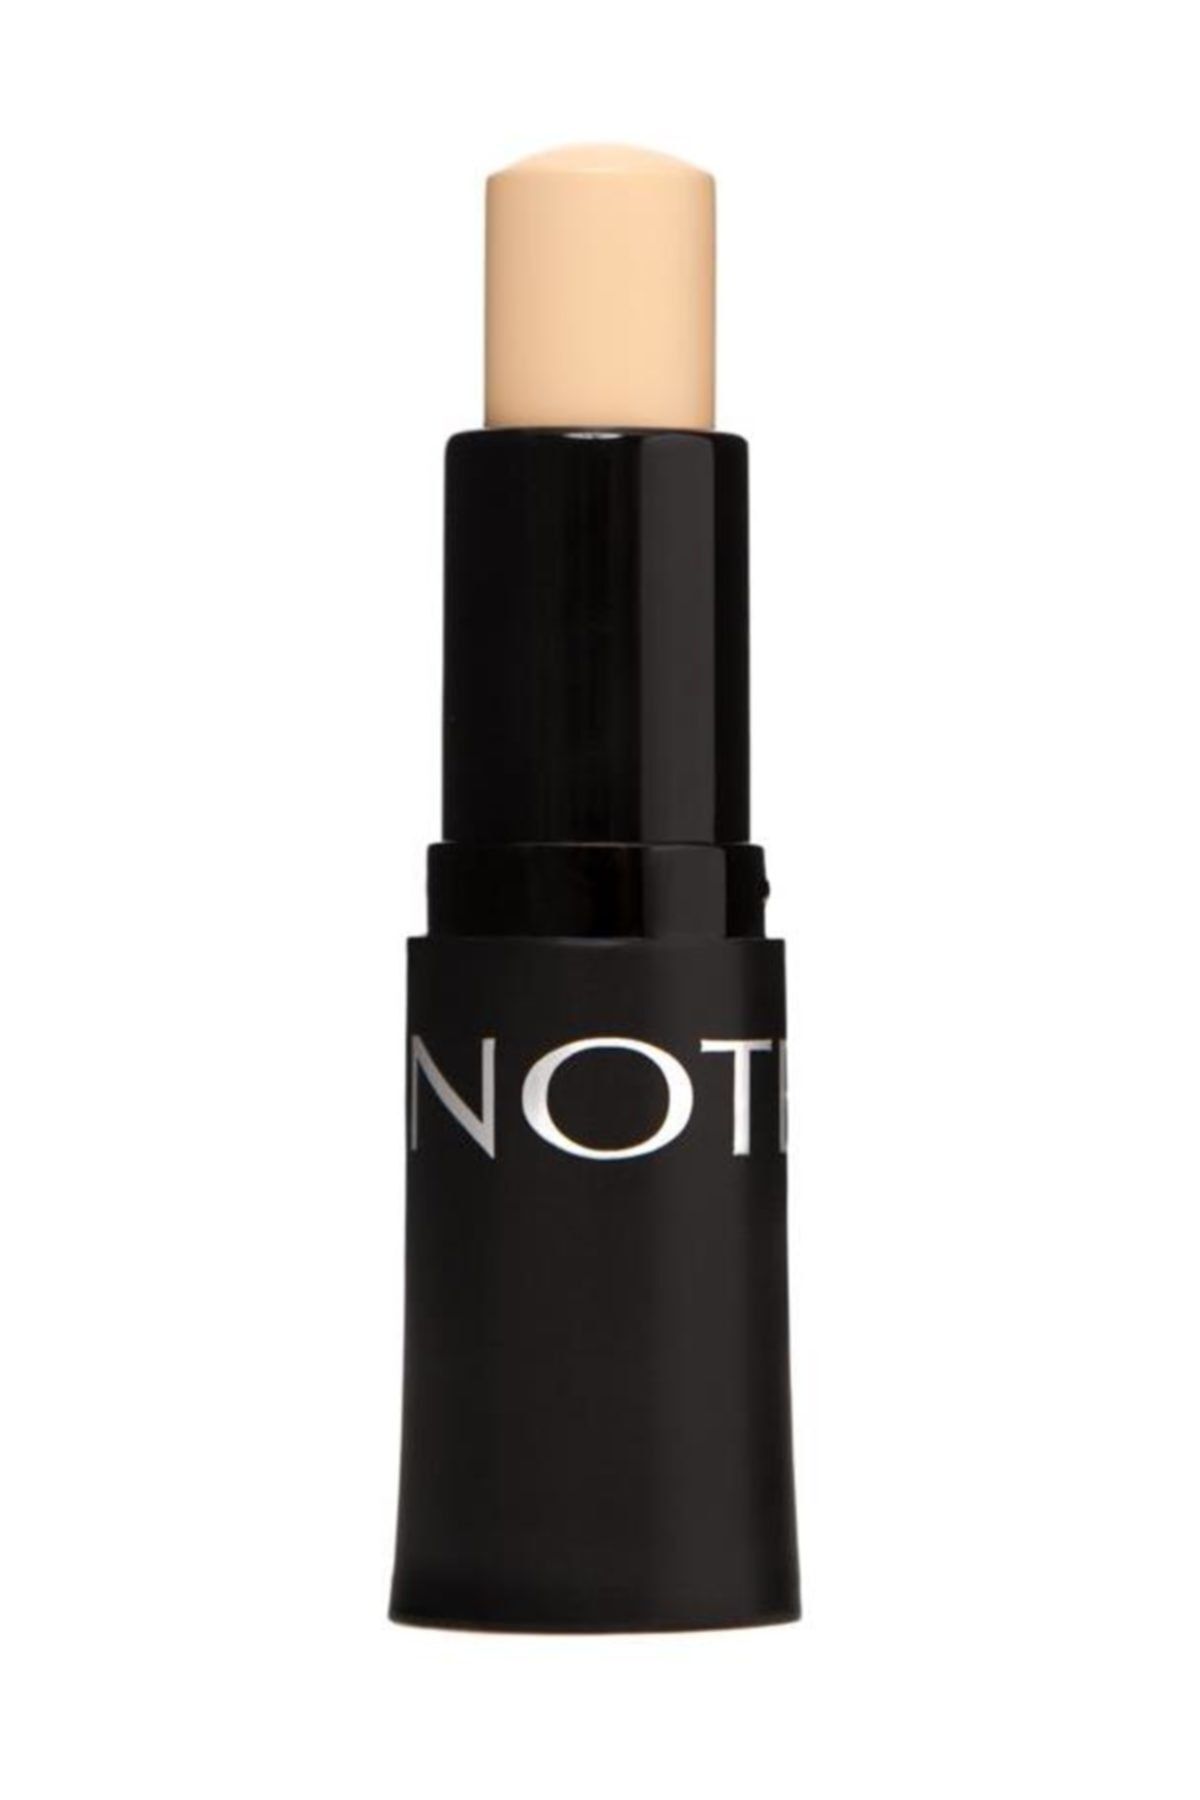 Note Cosmetics Full Coverage Stıck Concealer 03